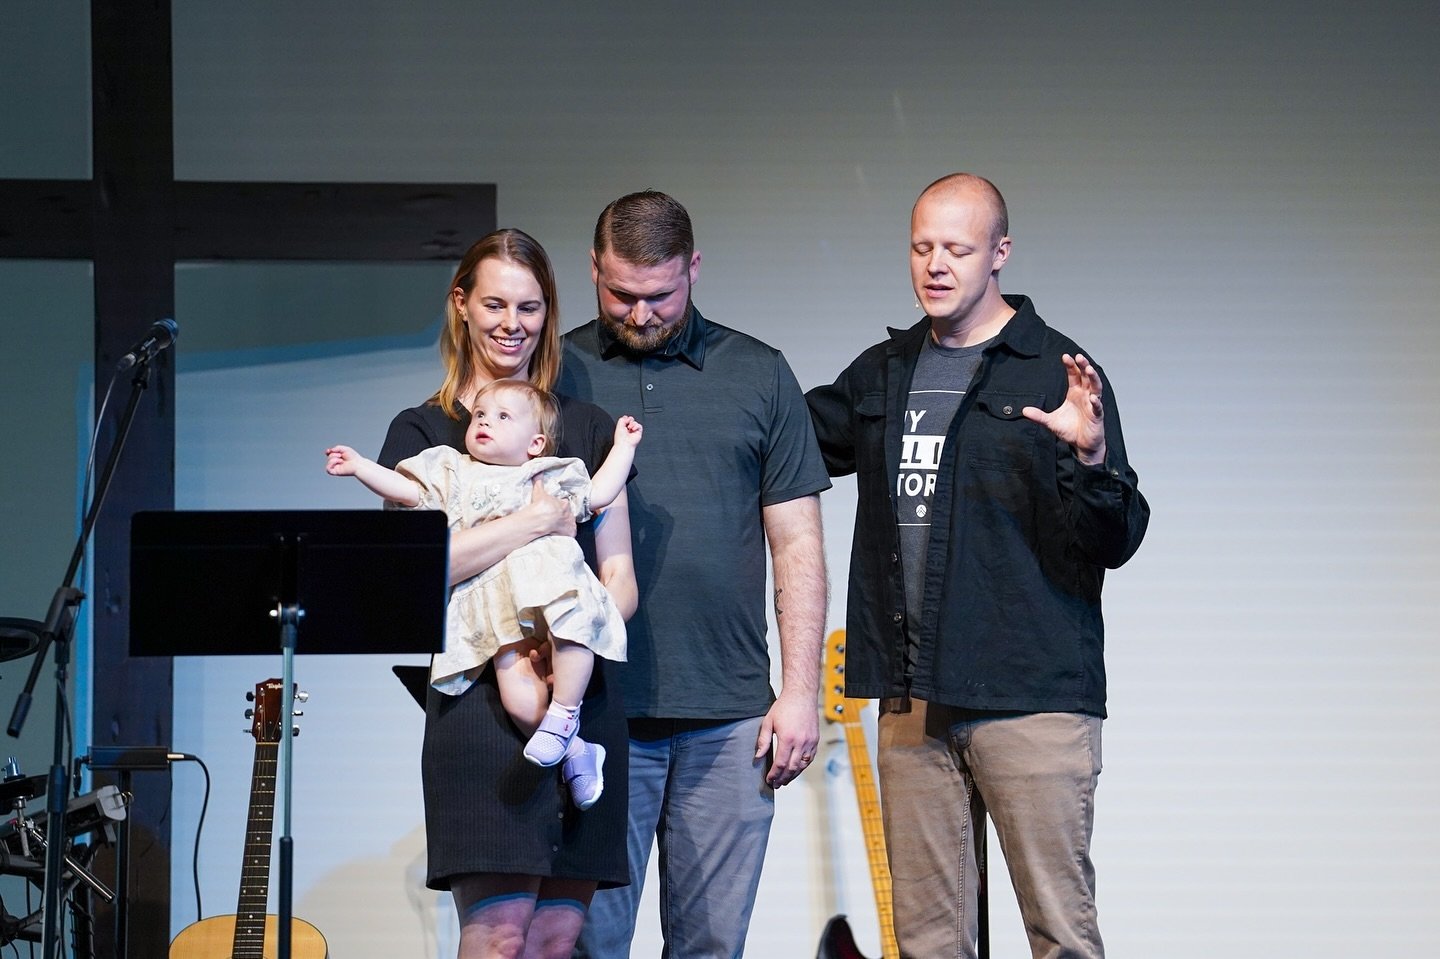 This Sunday we celebrated another child dedication! We stand alongside these parents as they commit to being an example and raising Lyla to know and love Jesus! It&rsquo;s an honor to pray for you guys and encourage you.